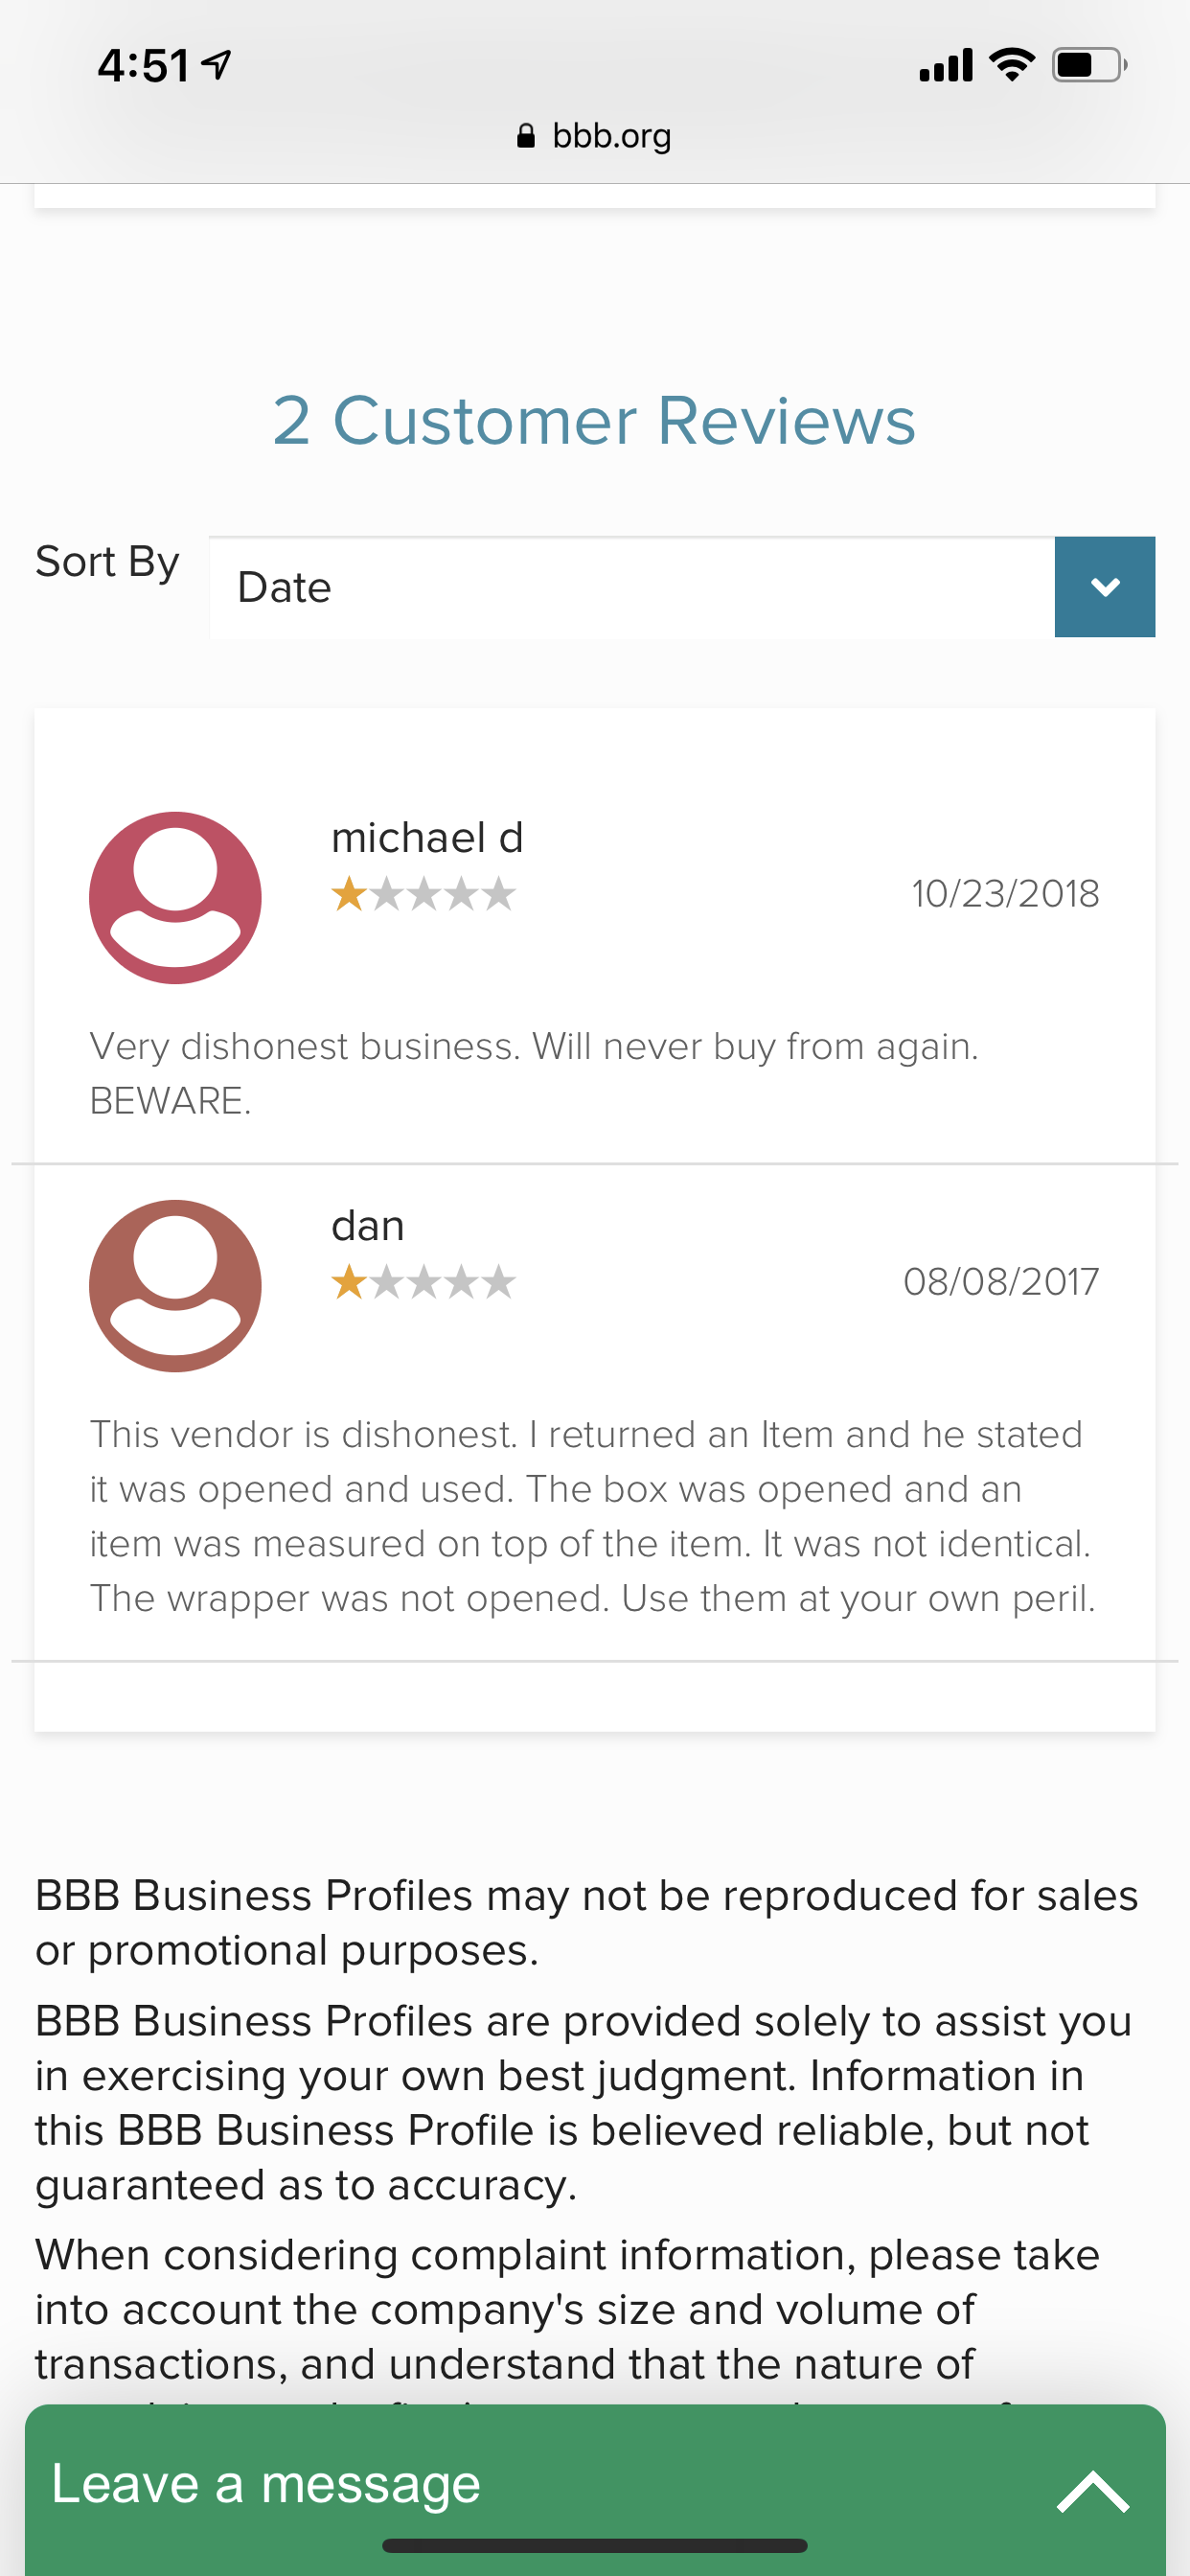 Reviews I found on BBB